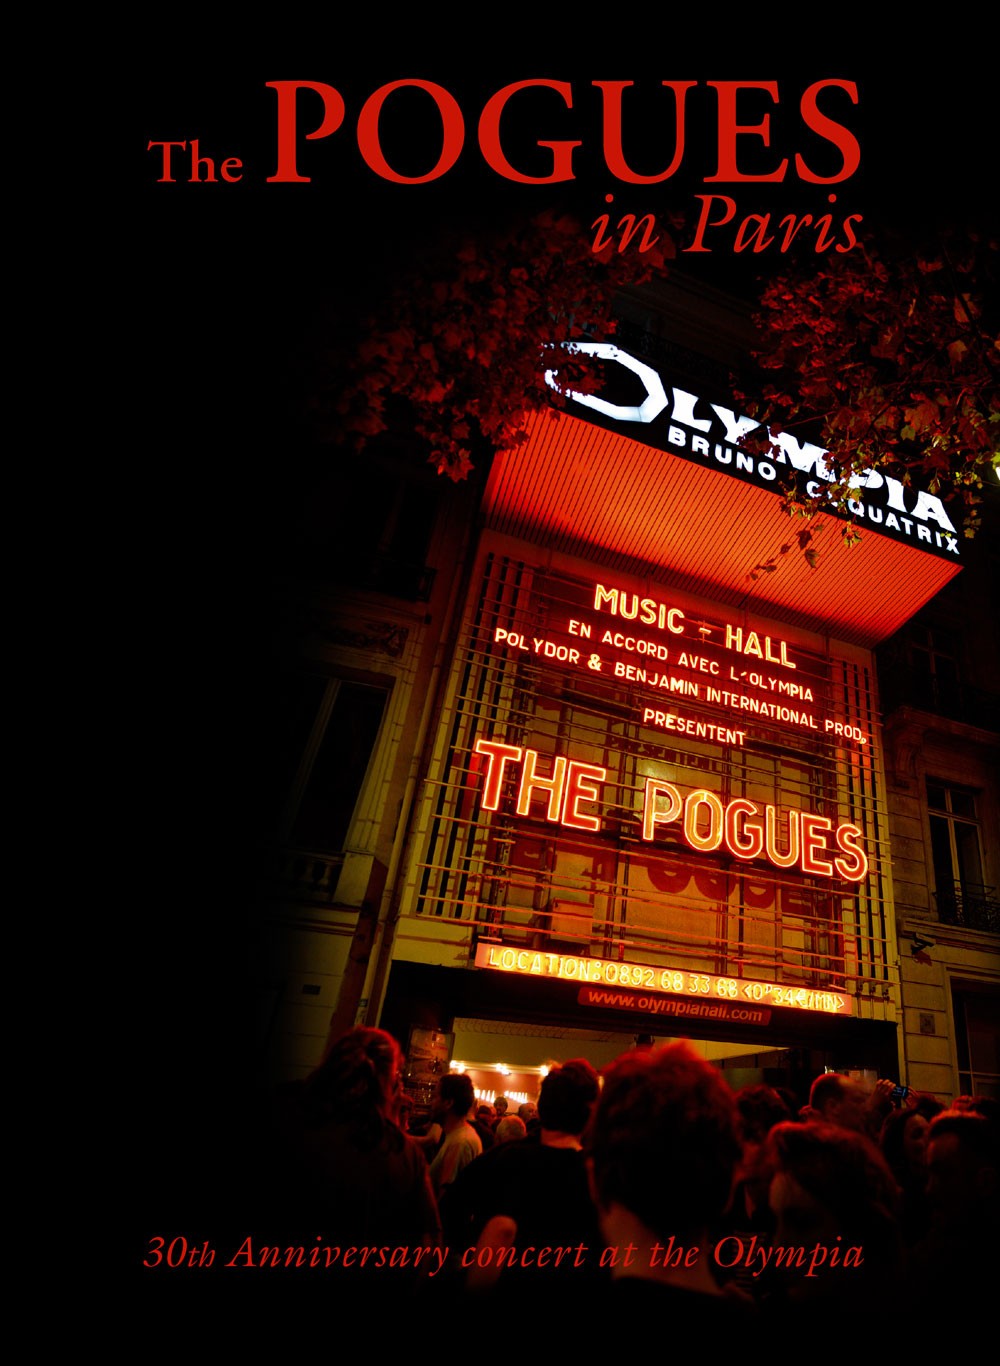 THE POGUES in Paris - 30th anniversary concert at the Olympia